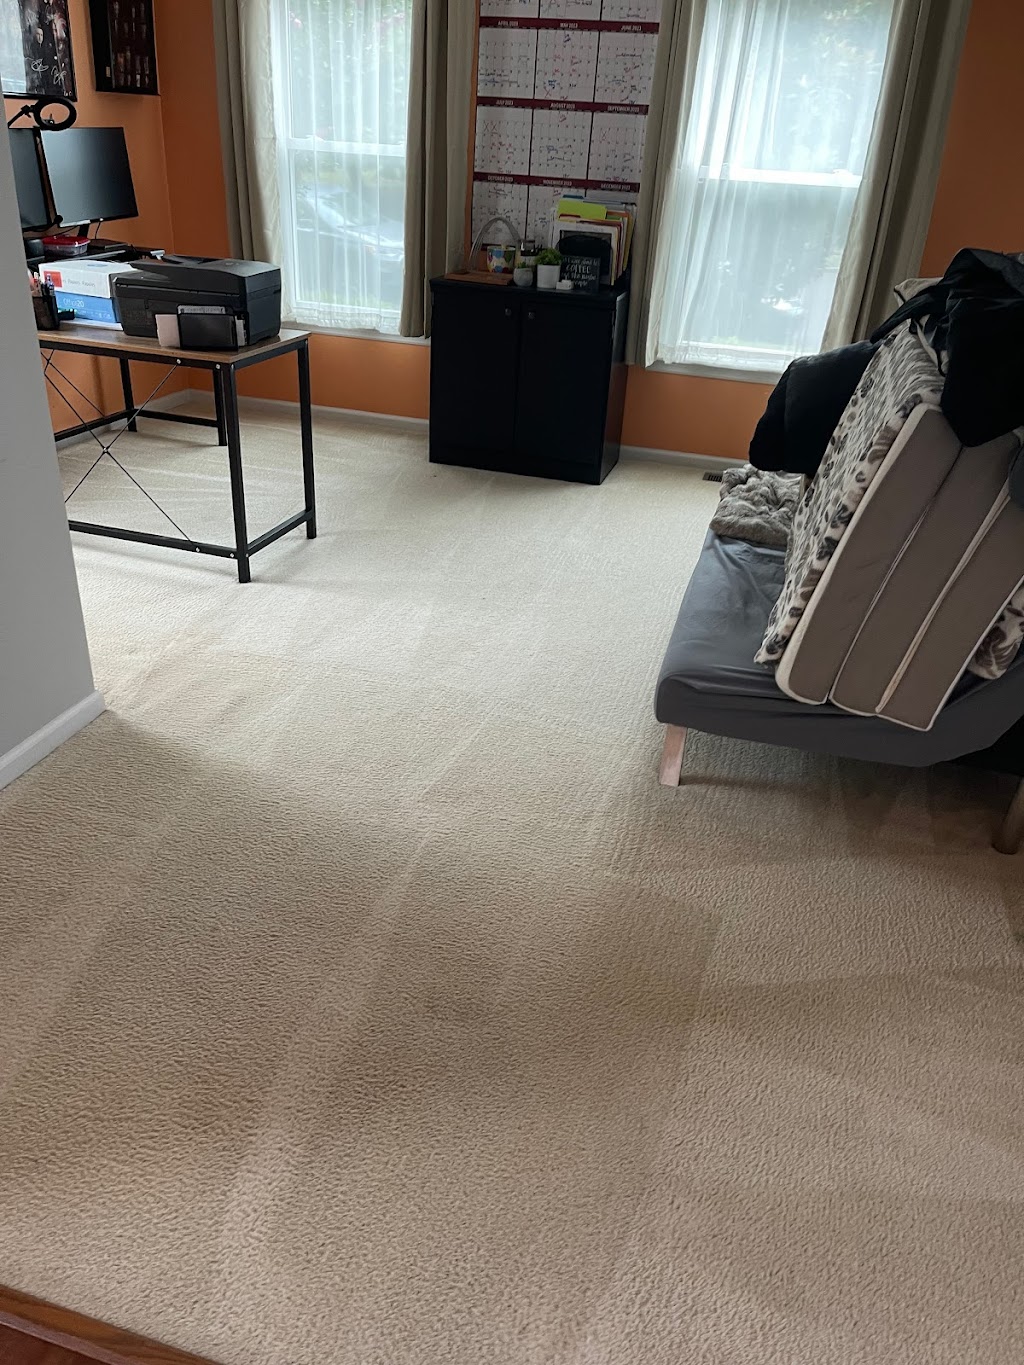 American Carpet Cleaners LLC | 7 Westerly Dr, Sicklerville, NJ 08081 | Phone: (856) 728-5005